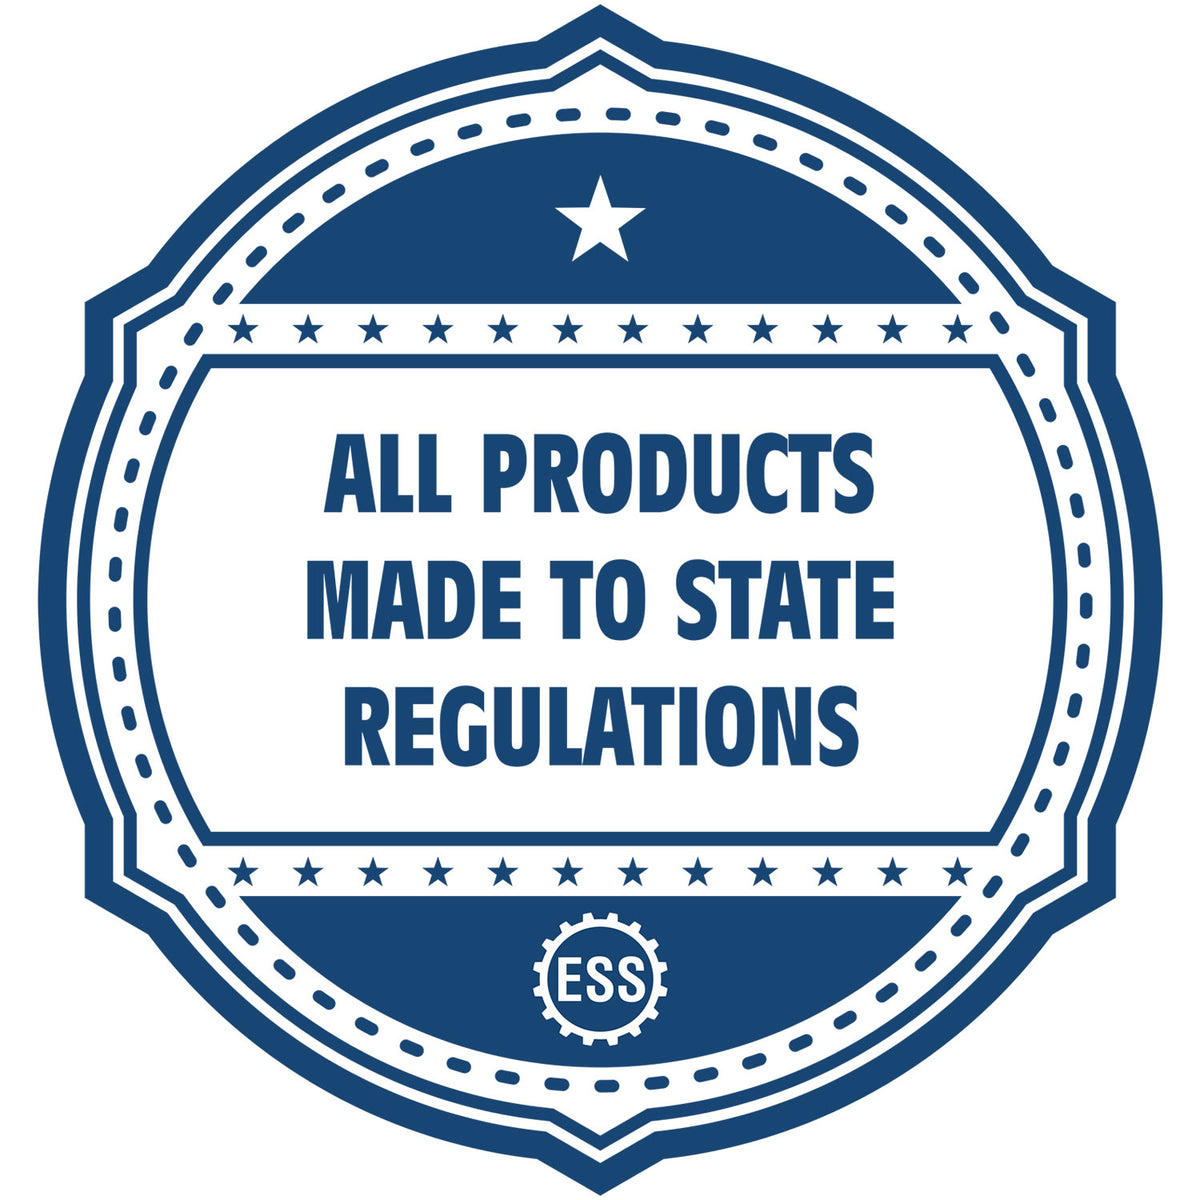 An icon or badge element for the MaxLight Premium Pre-Inked Indiana Rectangular Notarial Stamp showing that this product is made in compliance with state regulations.